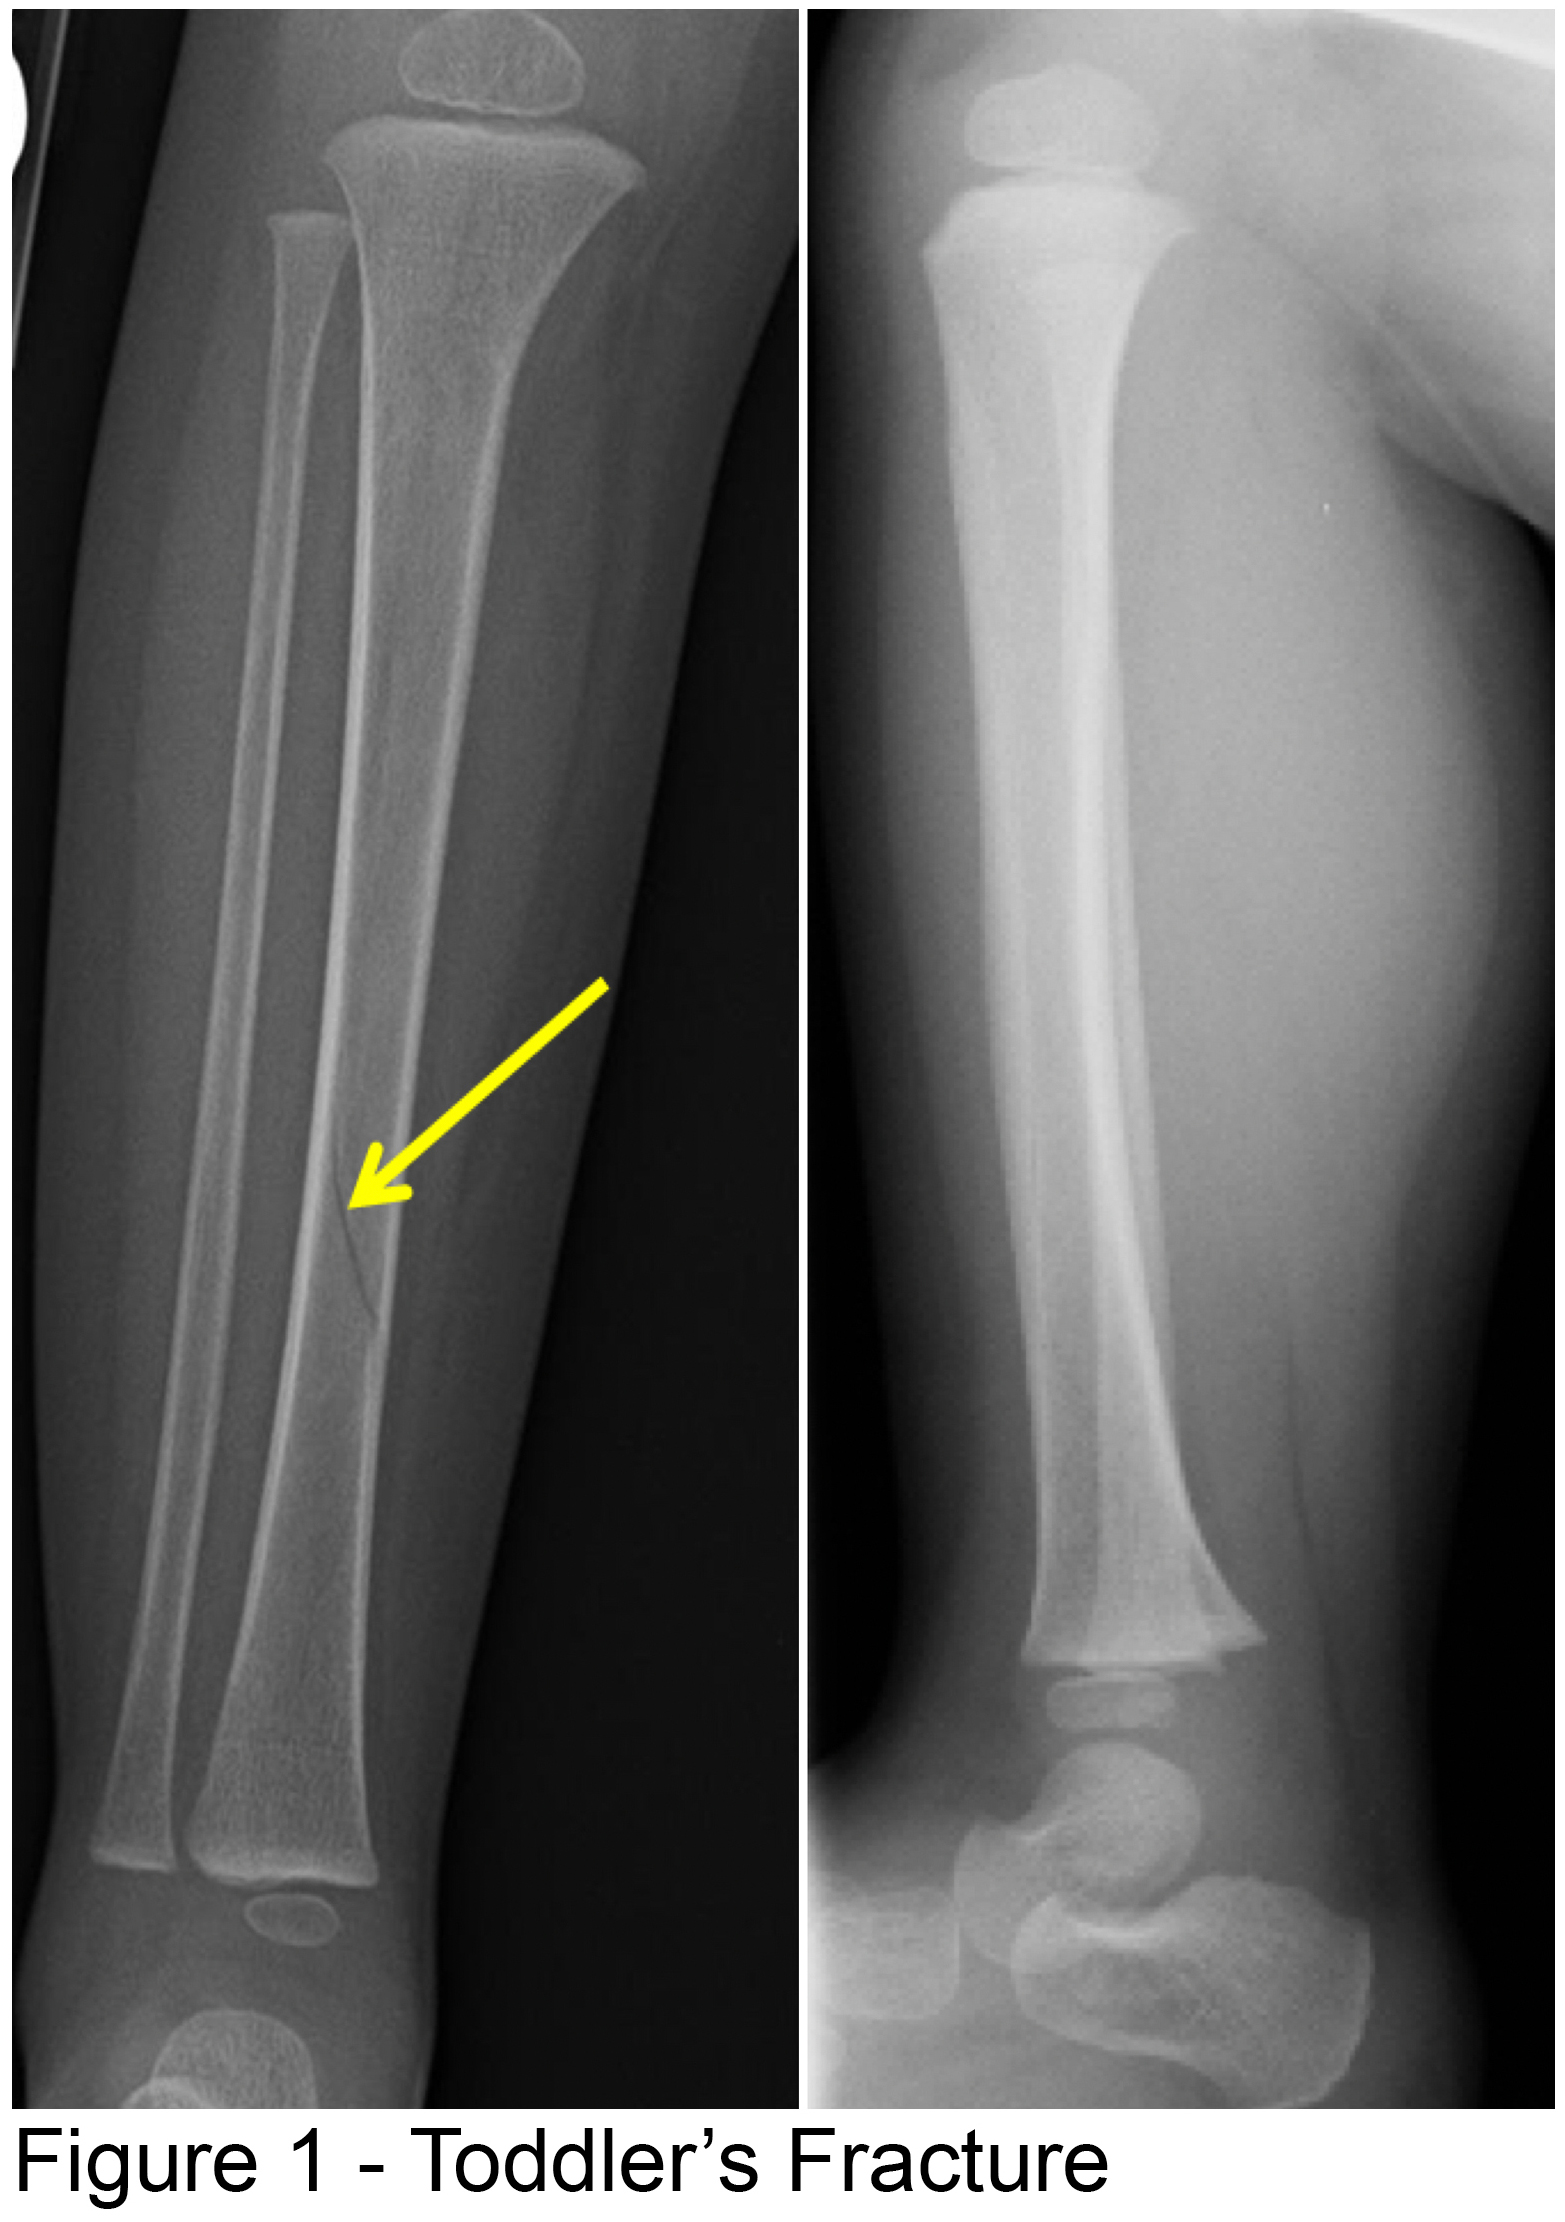 An Approach to Management of Toddler's Fractures